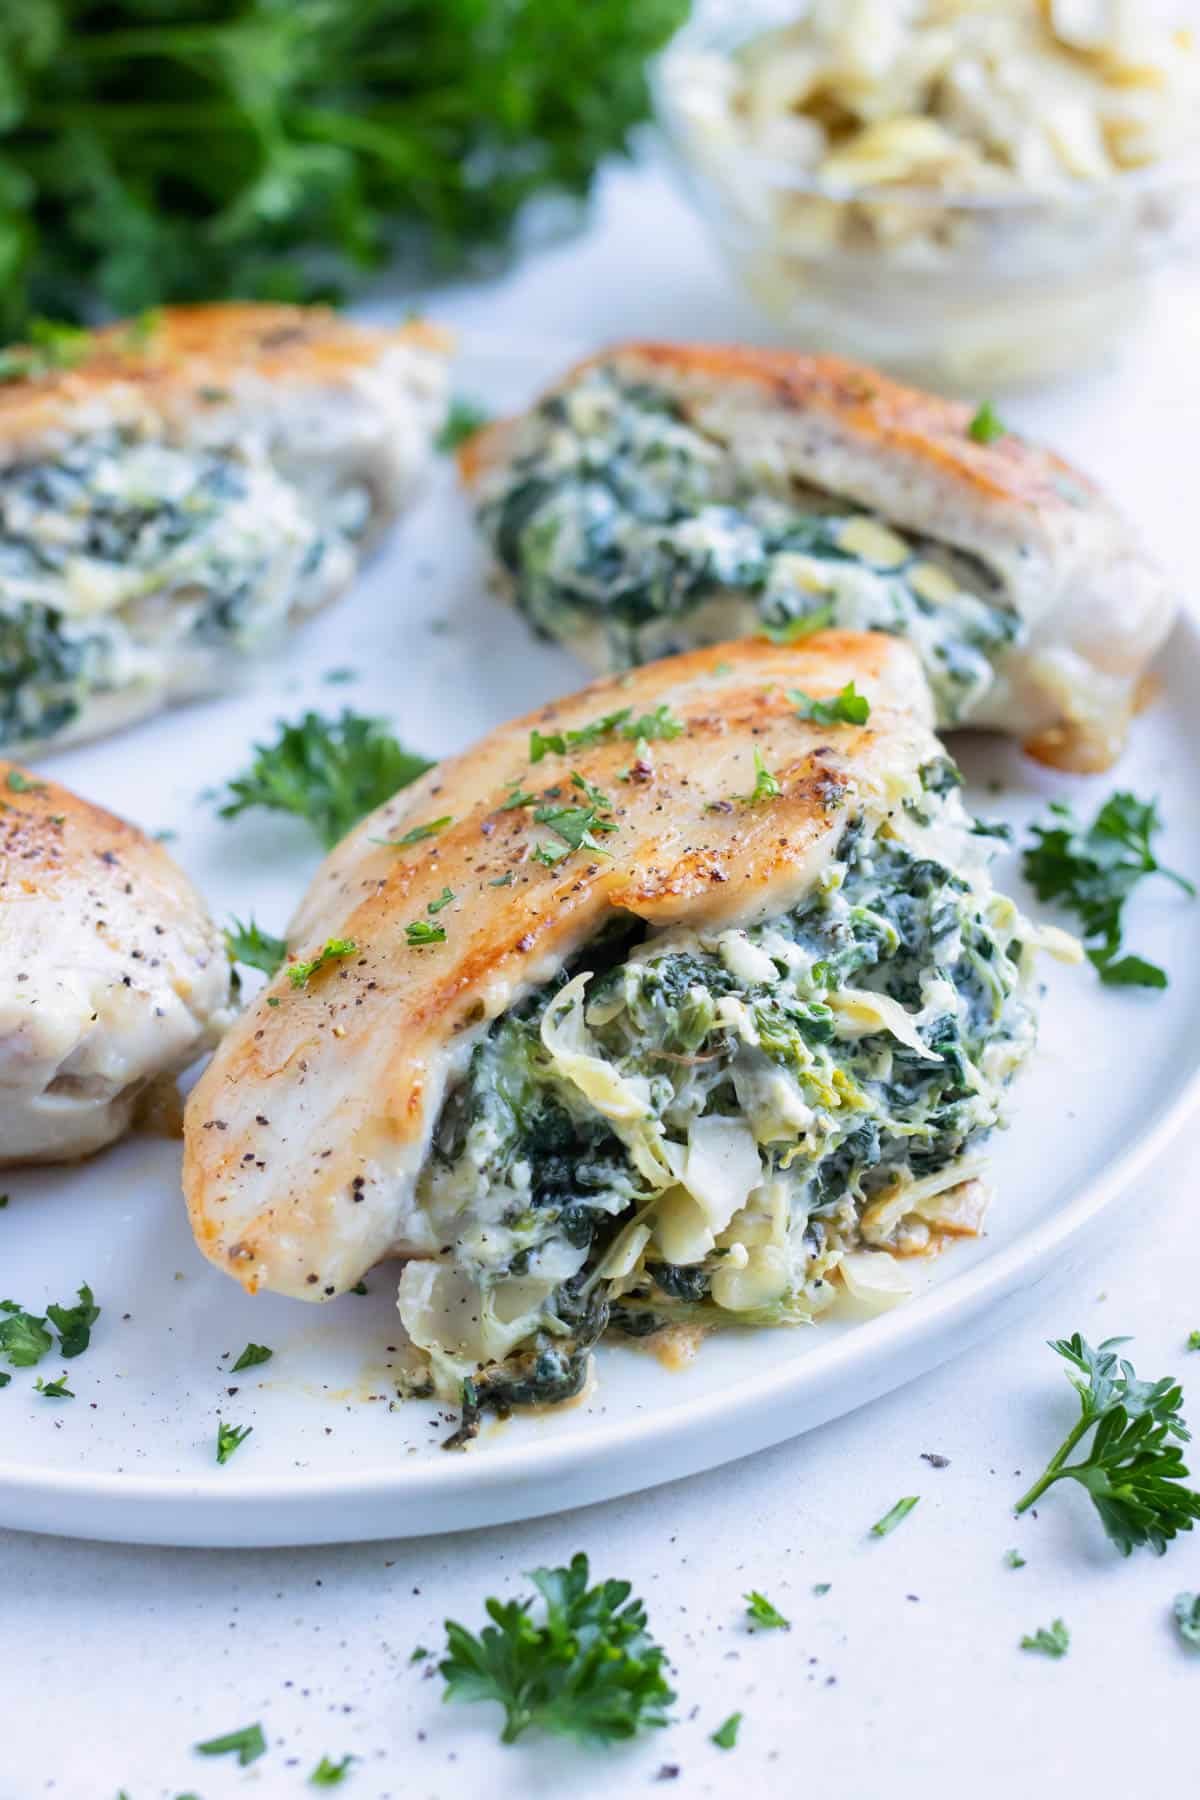 Low carb spinach artichoke chicken is served as a healthy, keto dinner.